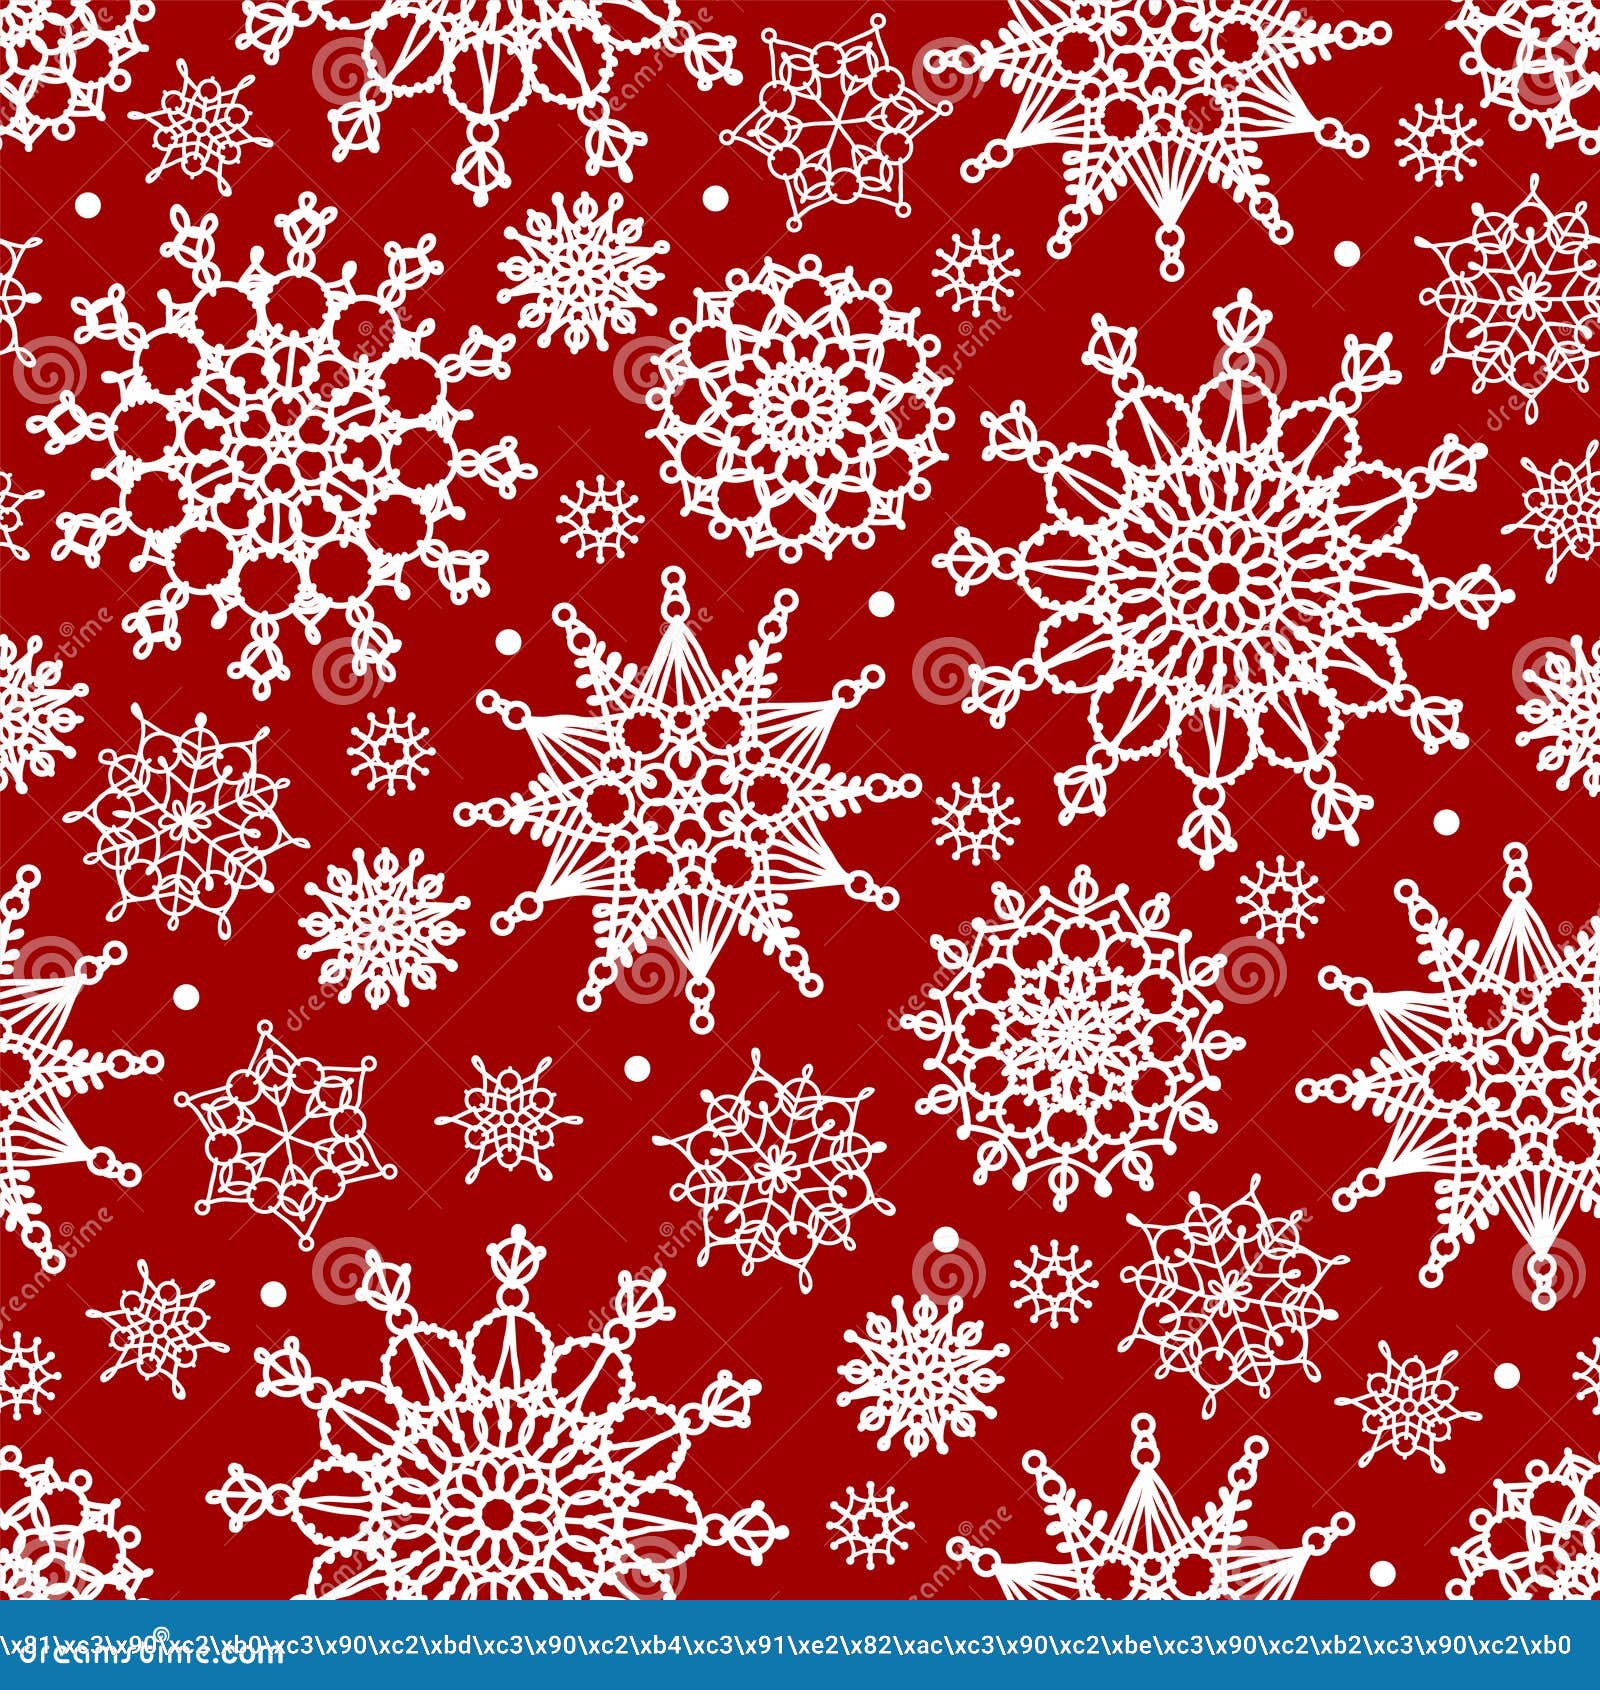 Snowflakes Seamless Pattern. Stock Vector - Illustration of knit ...